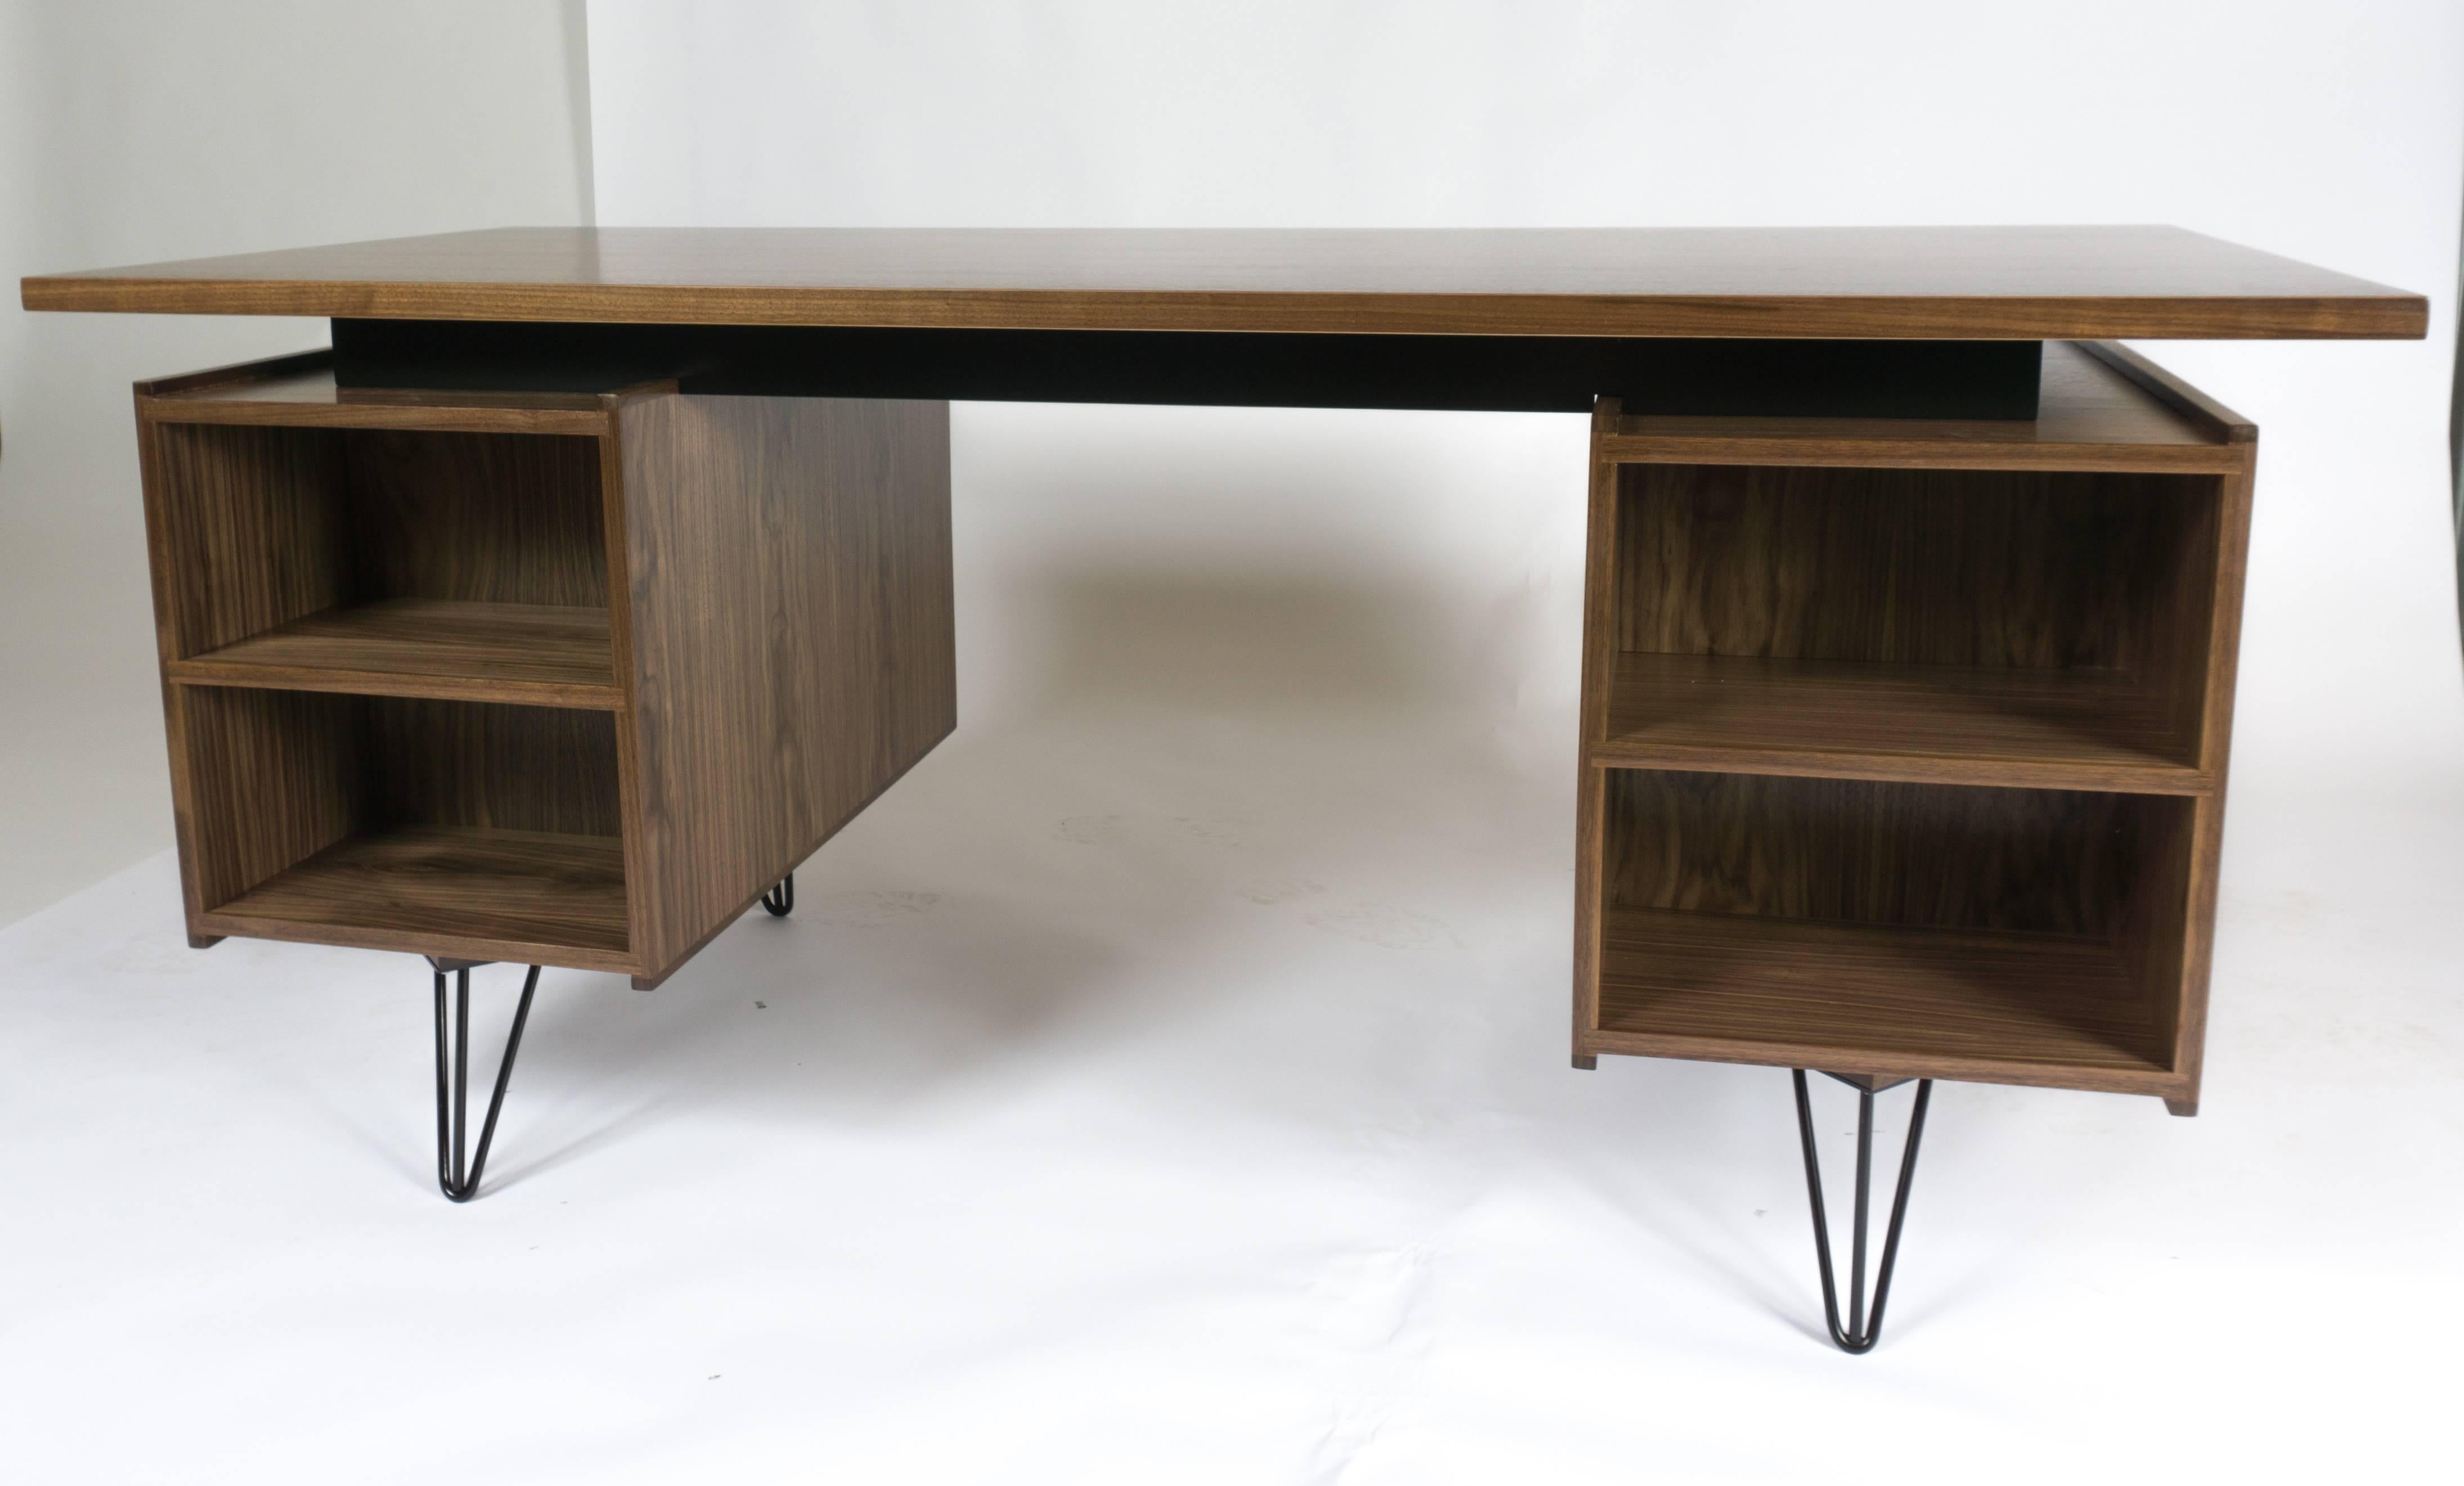 Designed and made by Precision Design and Neven & Neven Modern. One side has the two drawers and a pull-out writing board. Behind the left side door is a pull-out hanging file. On the other side of desk are open shelves to accommodate a variety